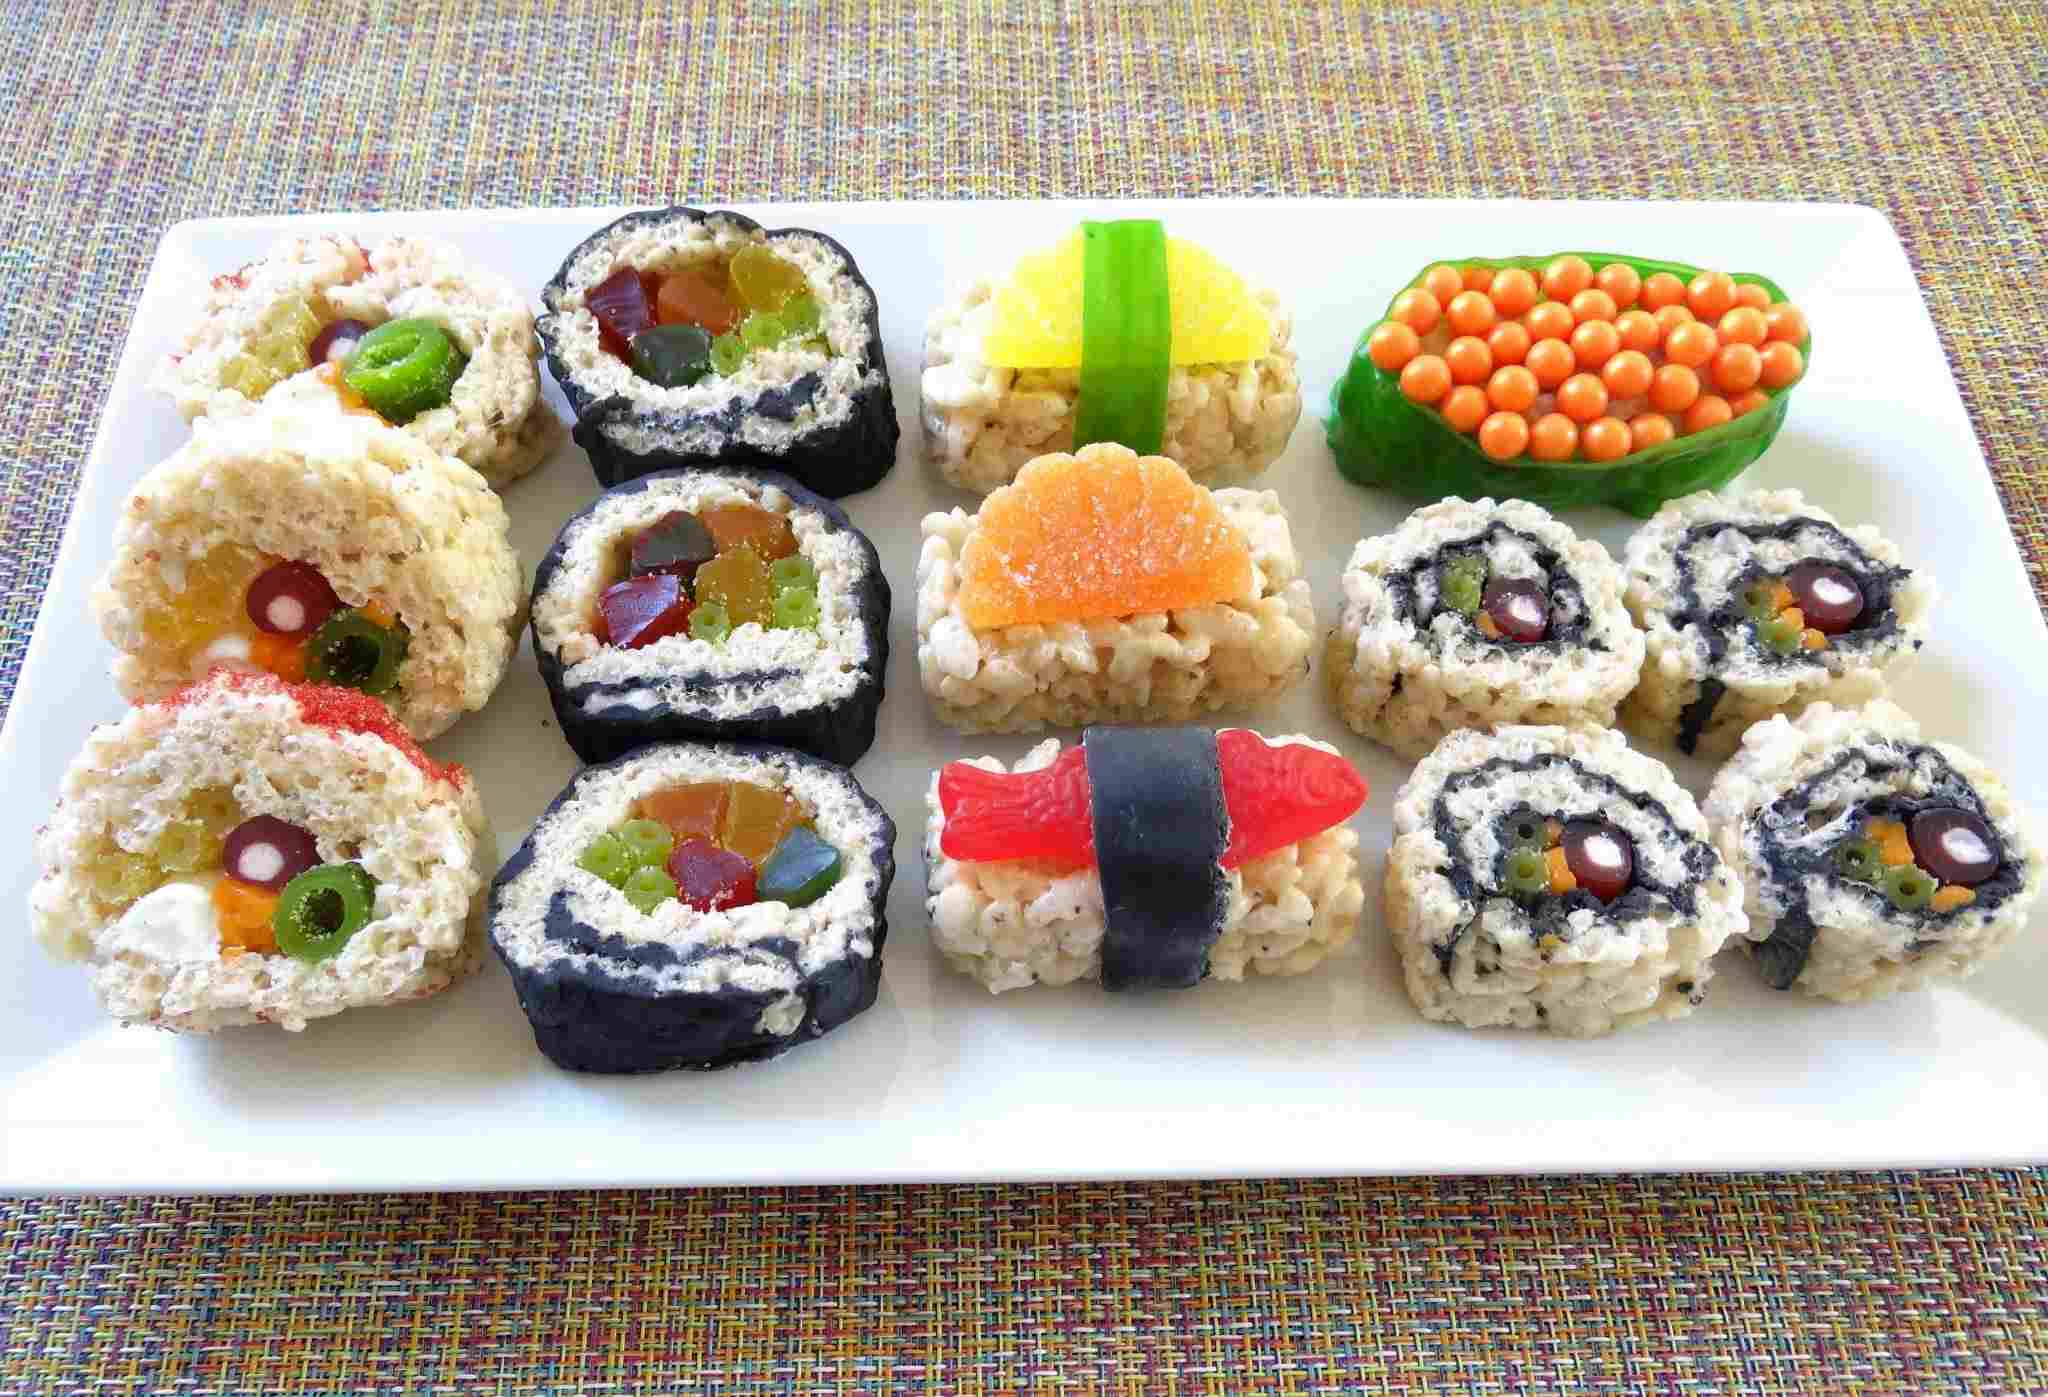 Sushi hack: This layered sushi makes perfect bite-sized hors d'oeuvres